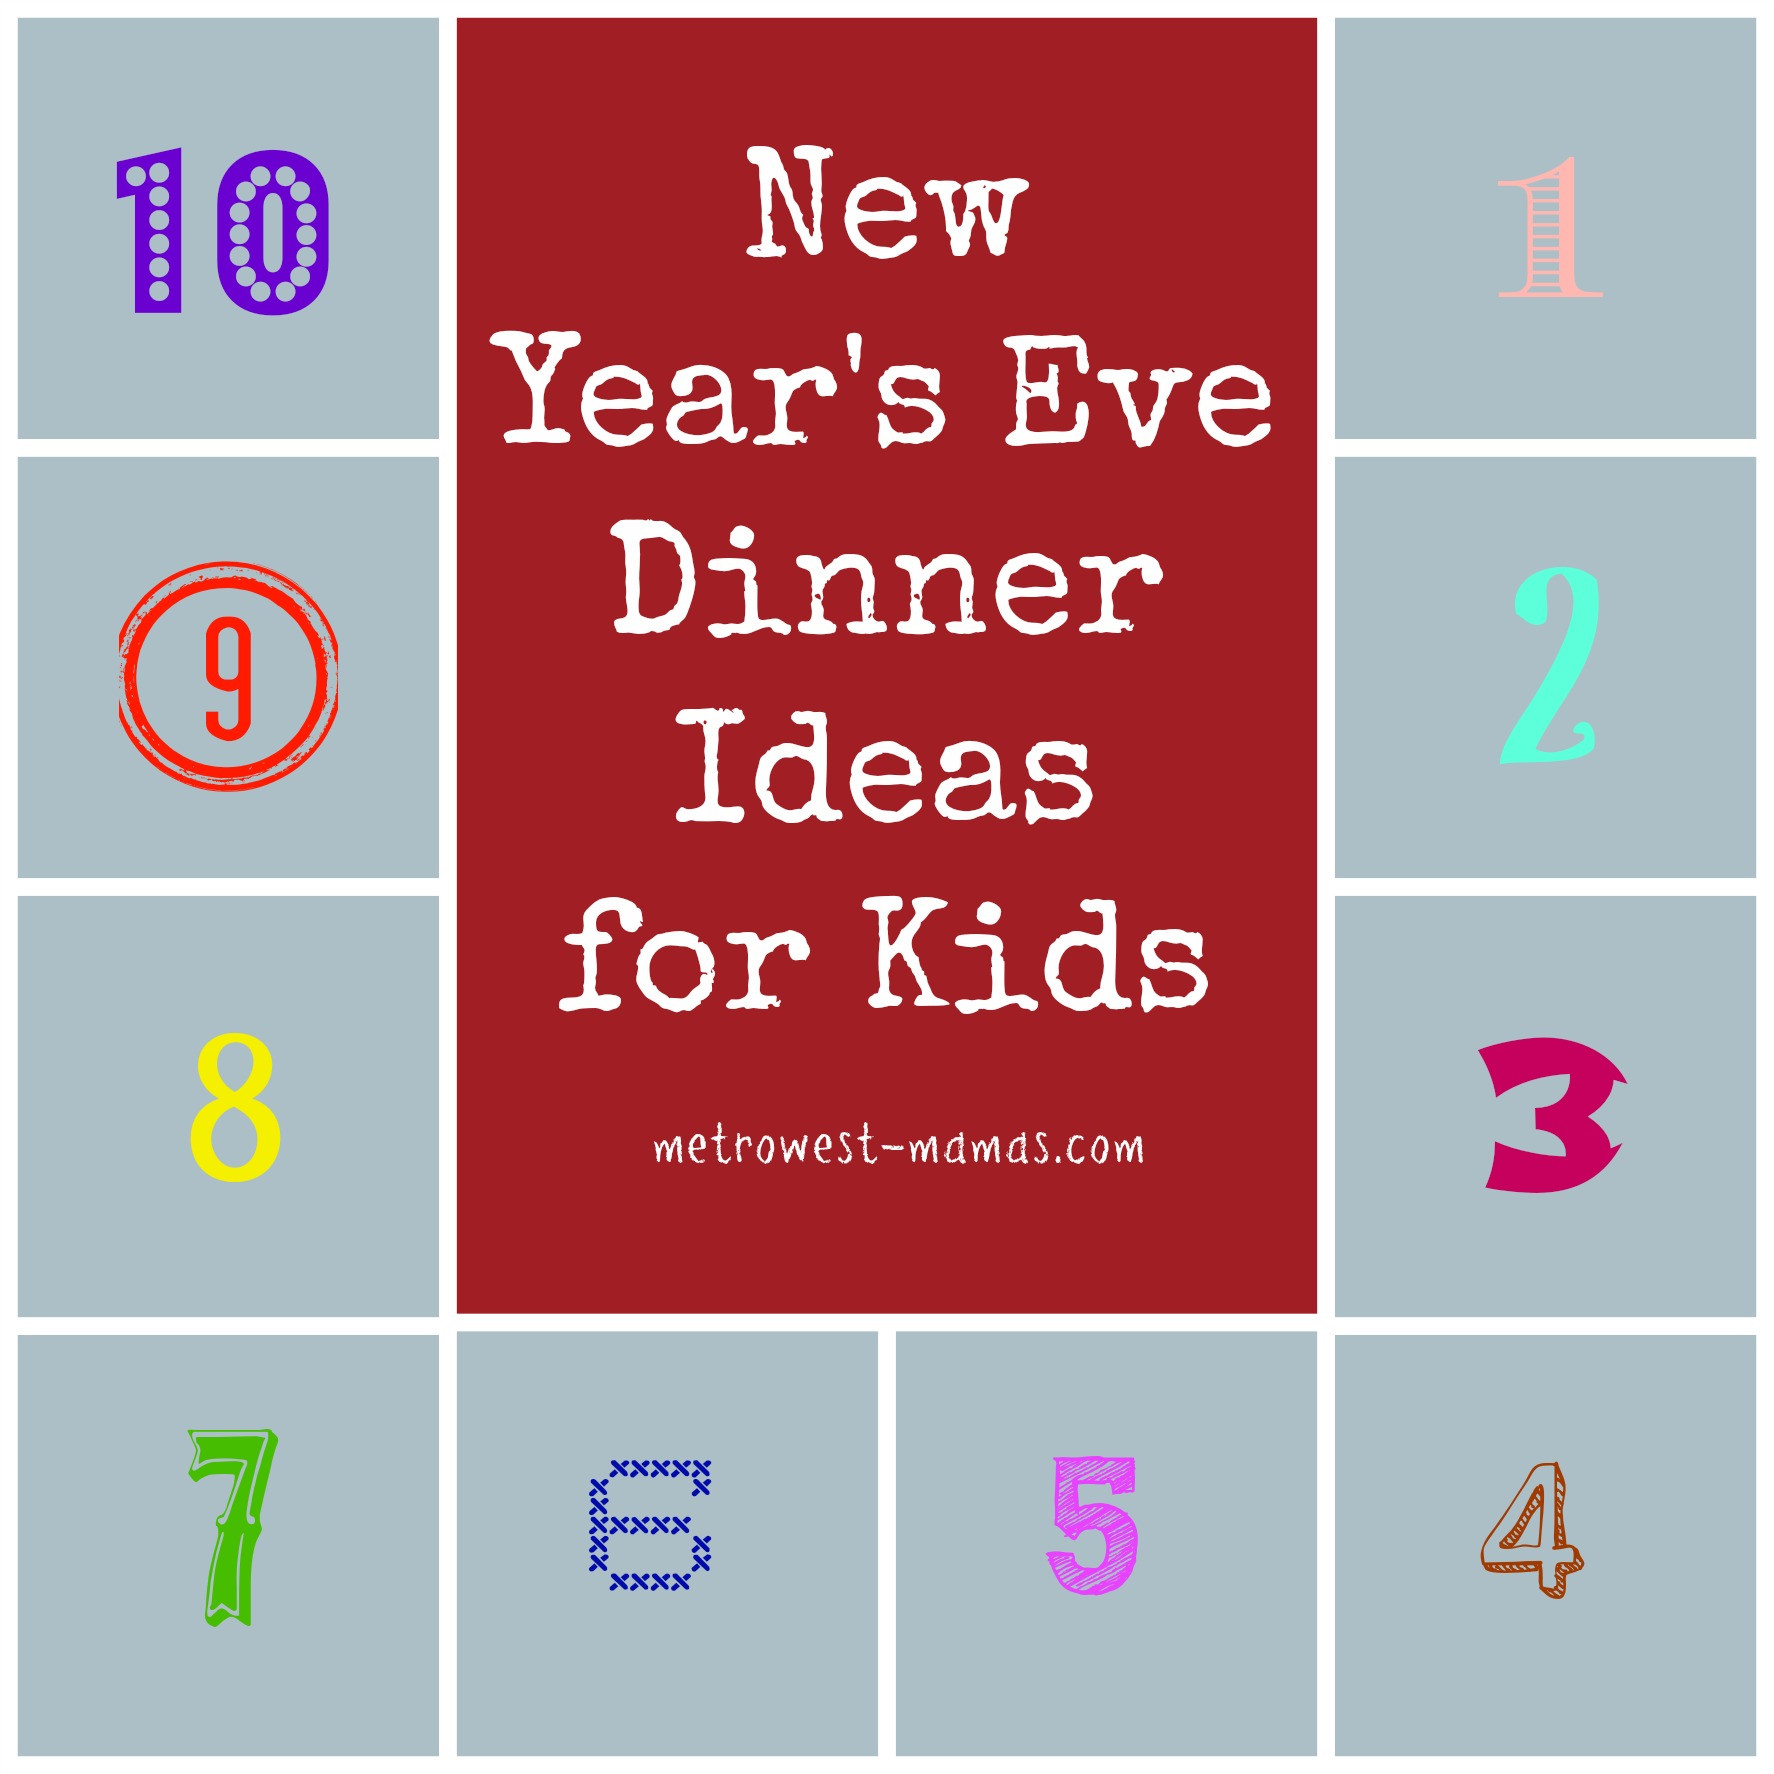 New Years Eve Dinner Ideas
 New Year s Eve Dinner Ideas for Kids Metrowest Mamas